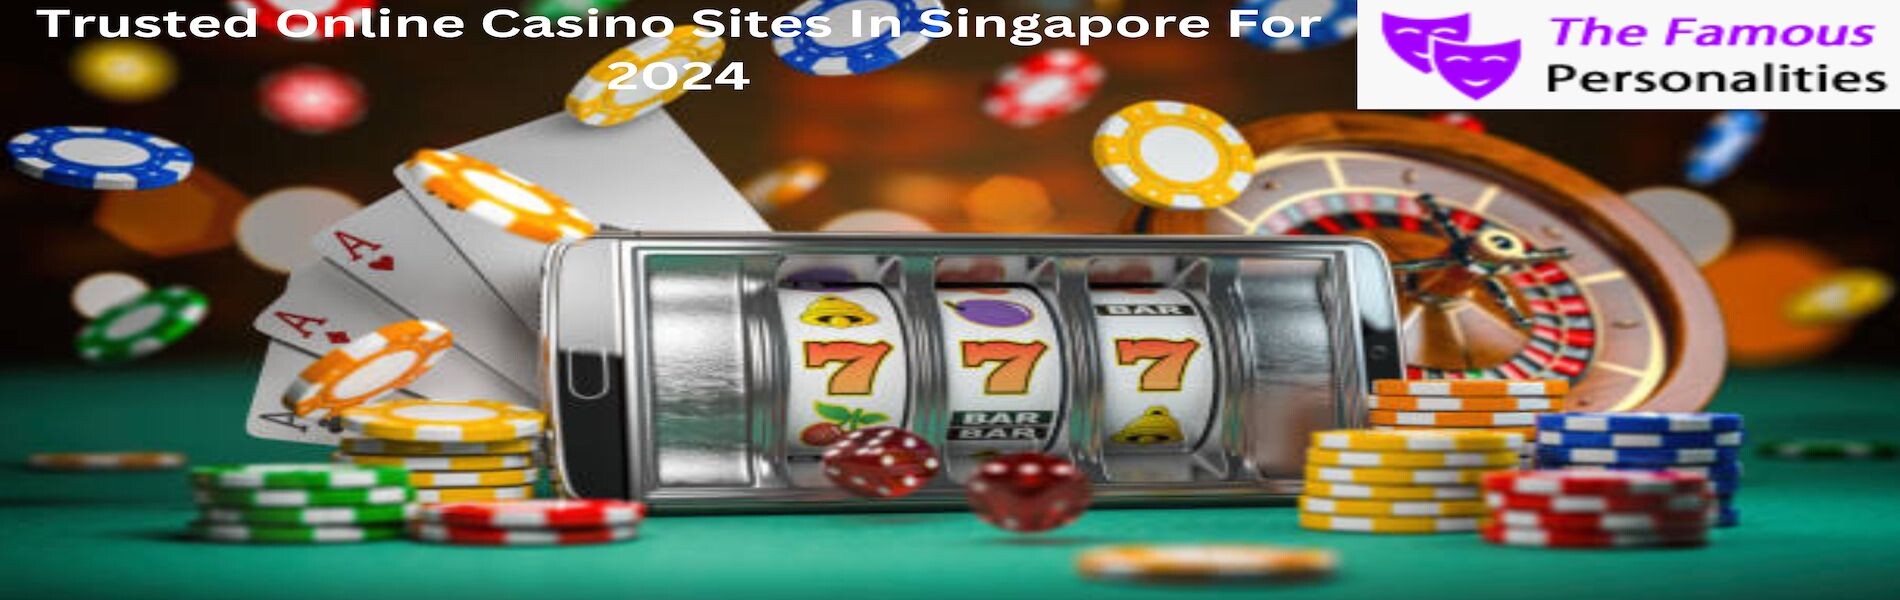 Trusted Online Casino Sites In Singapore For 2024